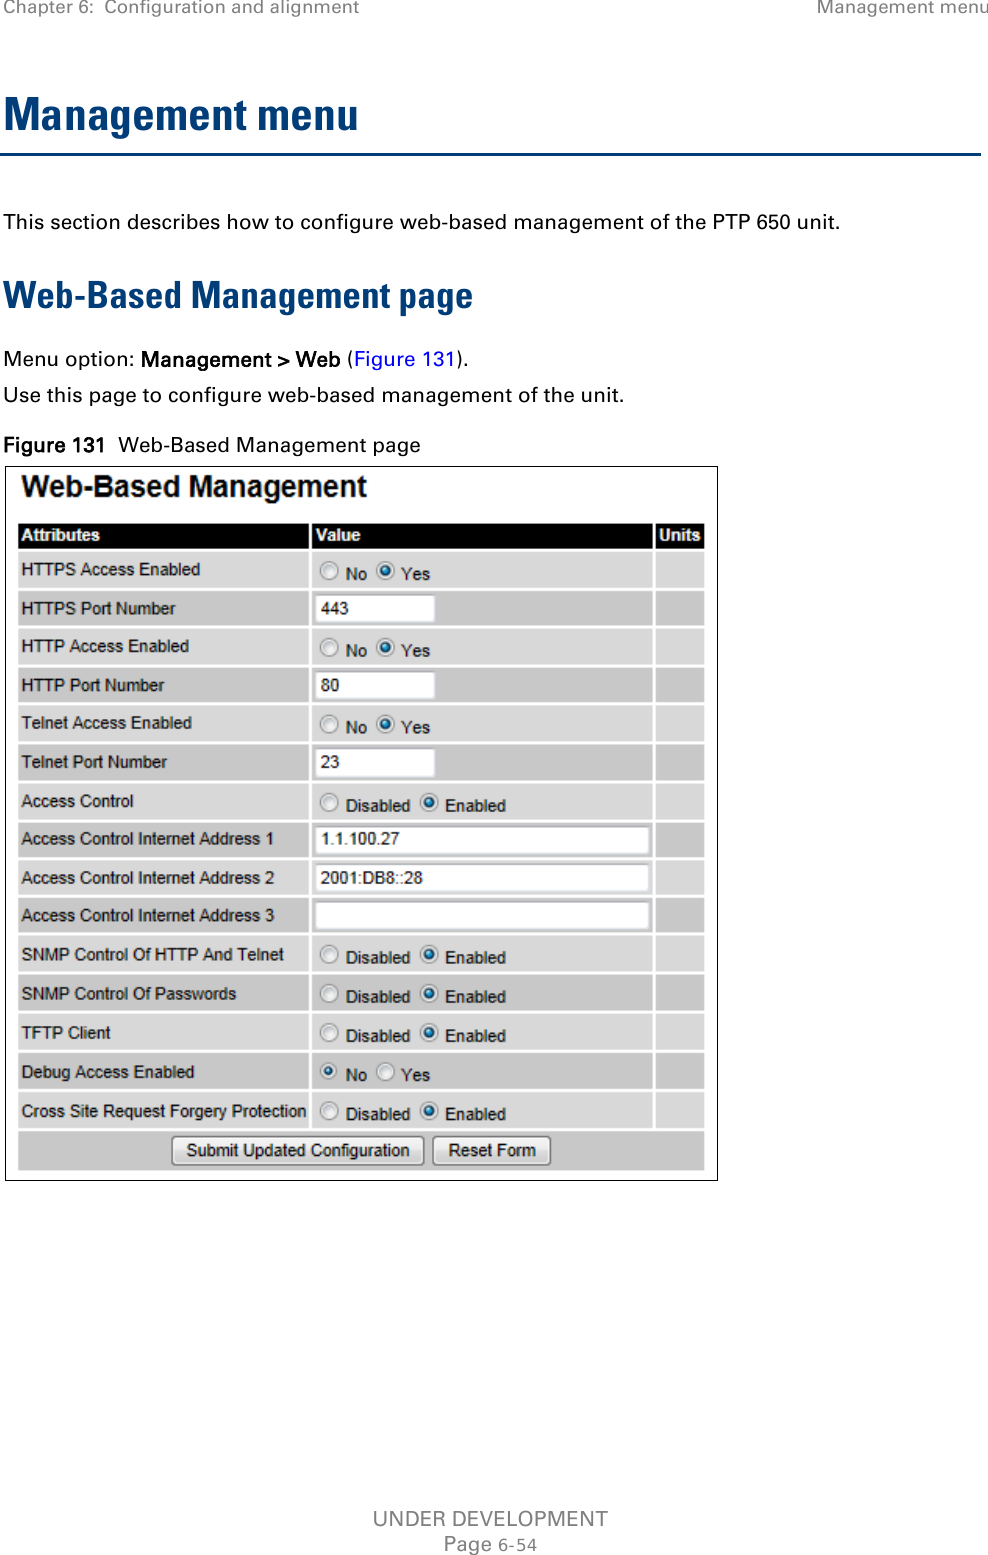 Chapter 6:  Configuration and alignment Management menu  Management menu This section describes how to configure web-based management of the PTP 650 unit. Web-Based Management page Menu option: Management &gt; Web (Figure 131). Use this page to configure web-based management of the unit. Figure 131  Web-Based Management page   UNDER DEVELOPMENT Page 6-54 